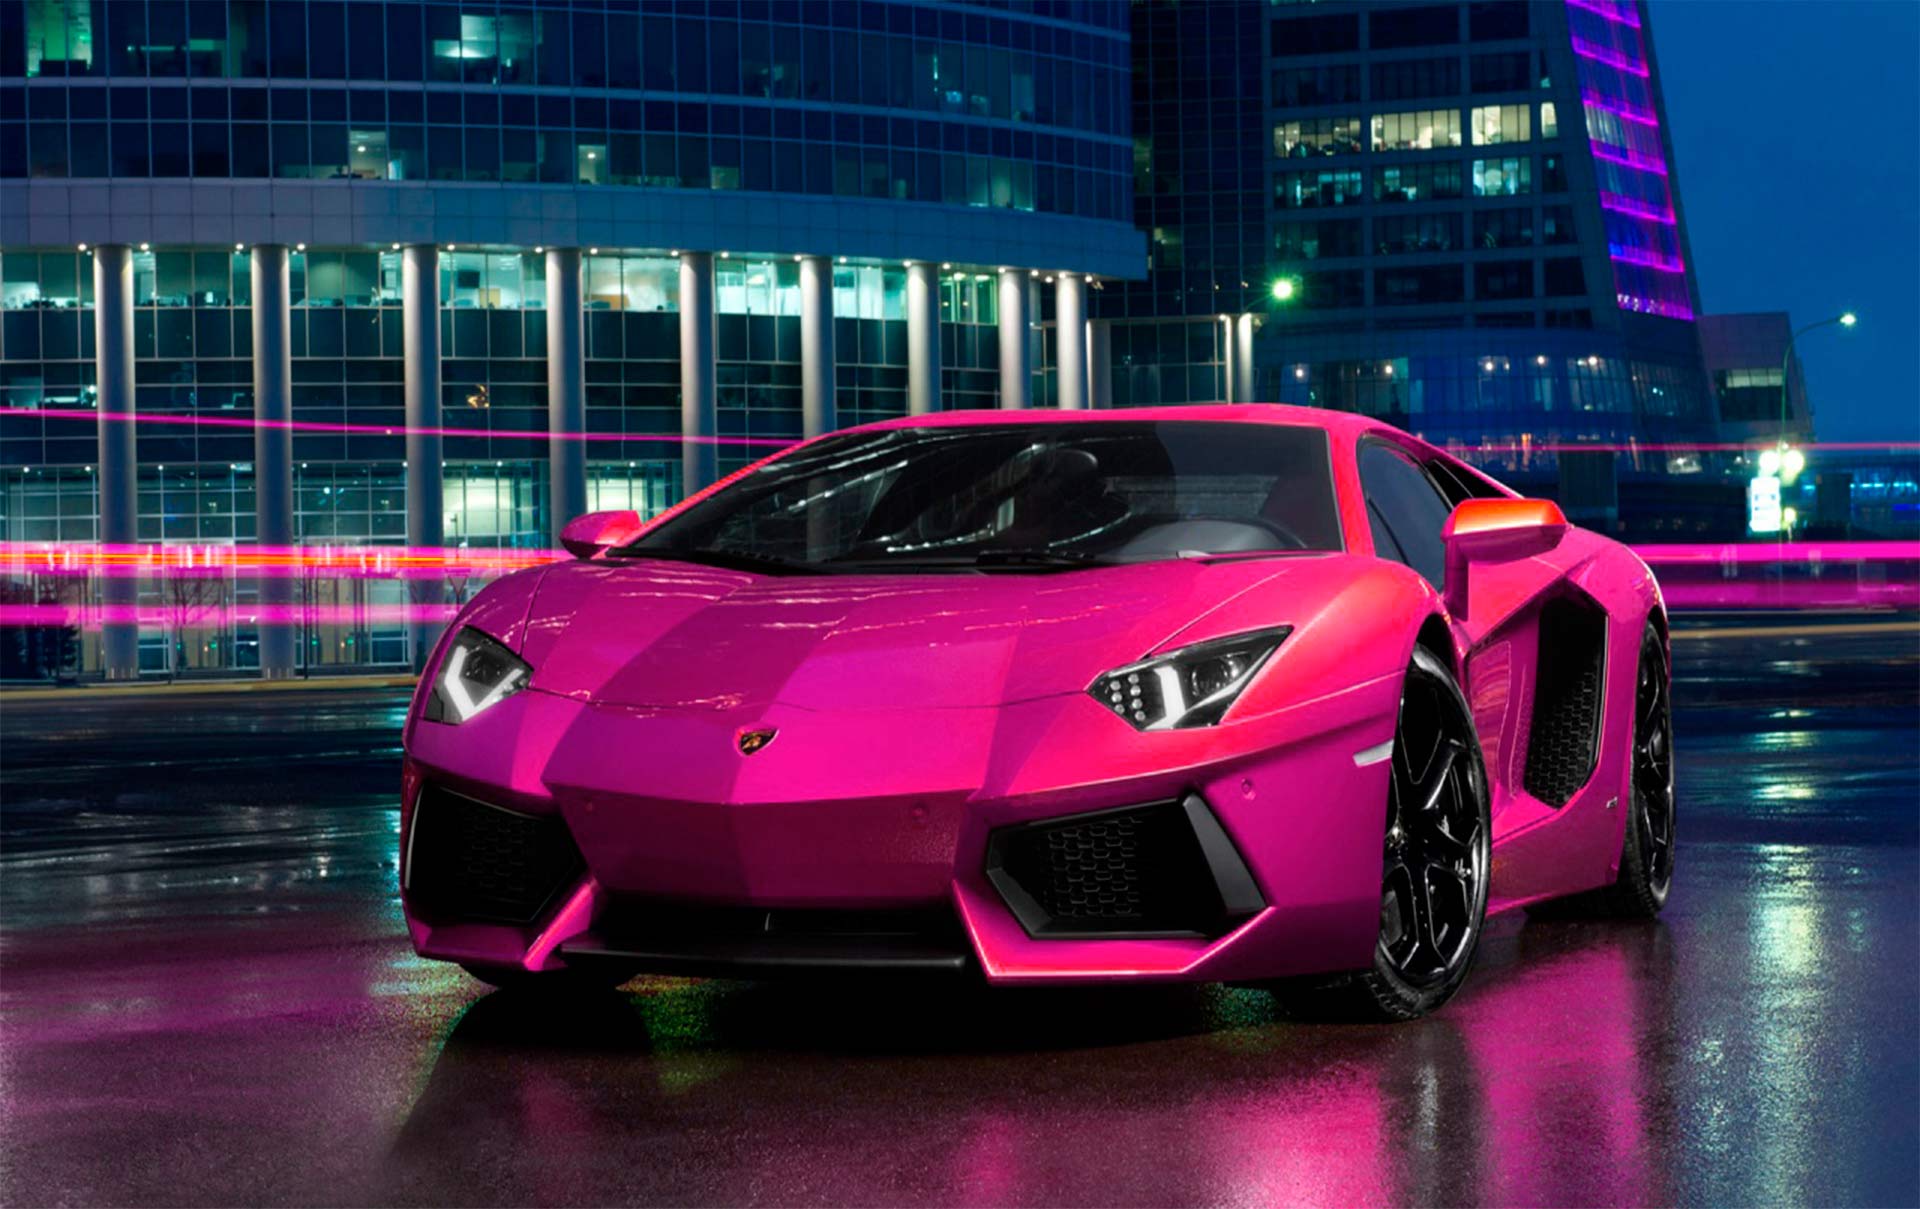 8 Facts About Lamborghini And how it's manufacture. — Steemit